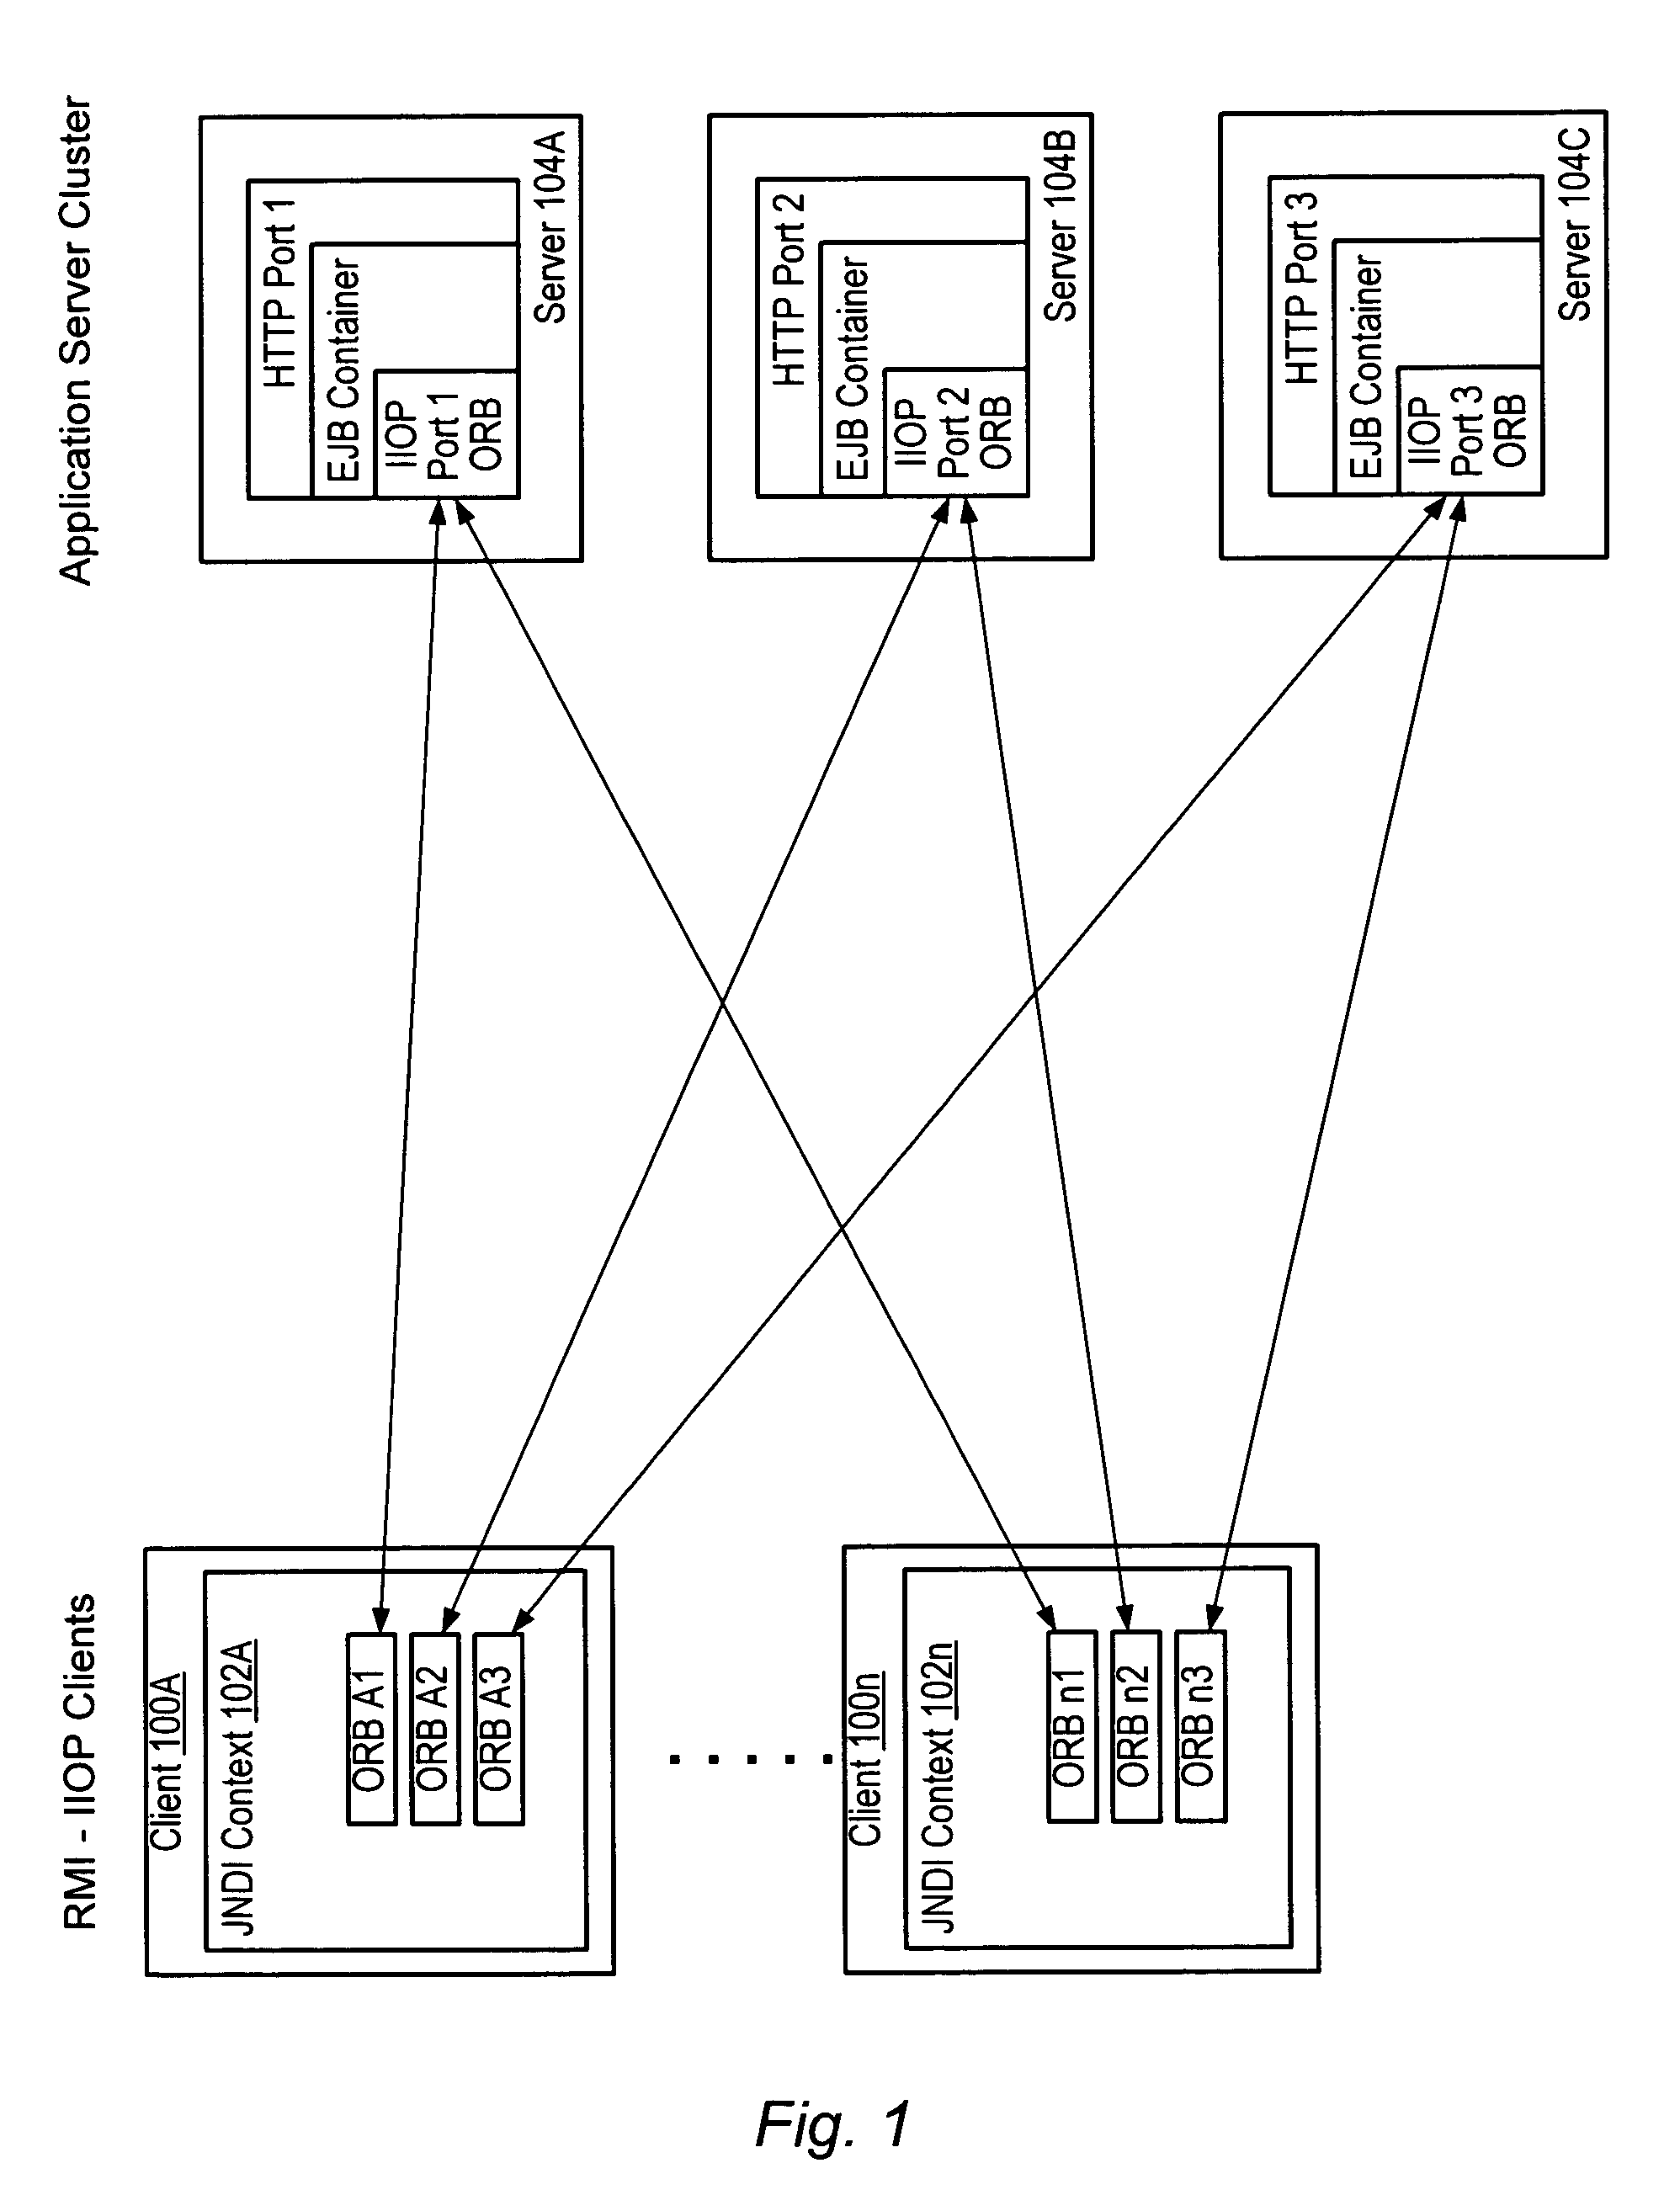 System and method for RMI-IIOP request load balancing